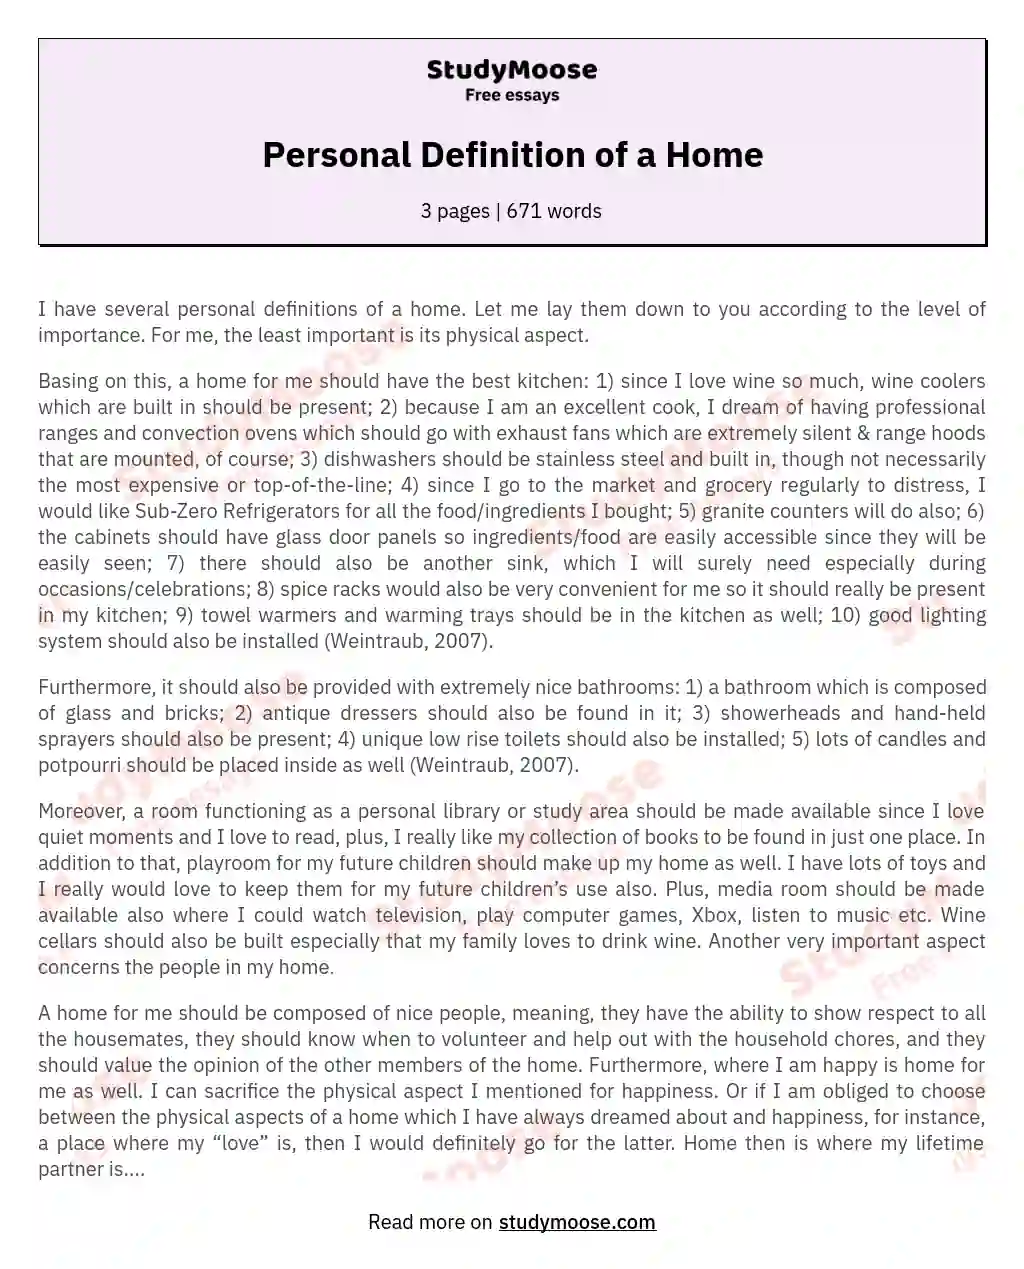 Personal Definition of a Home